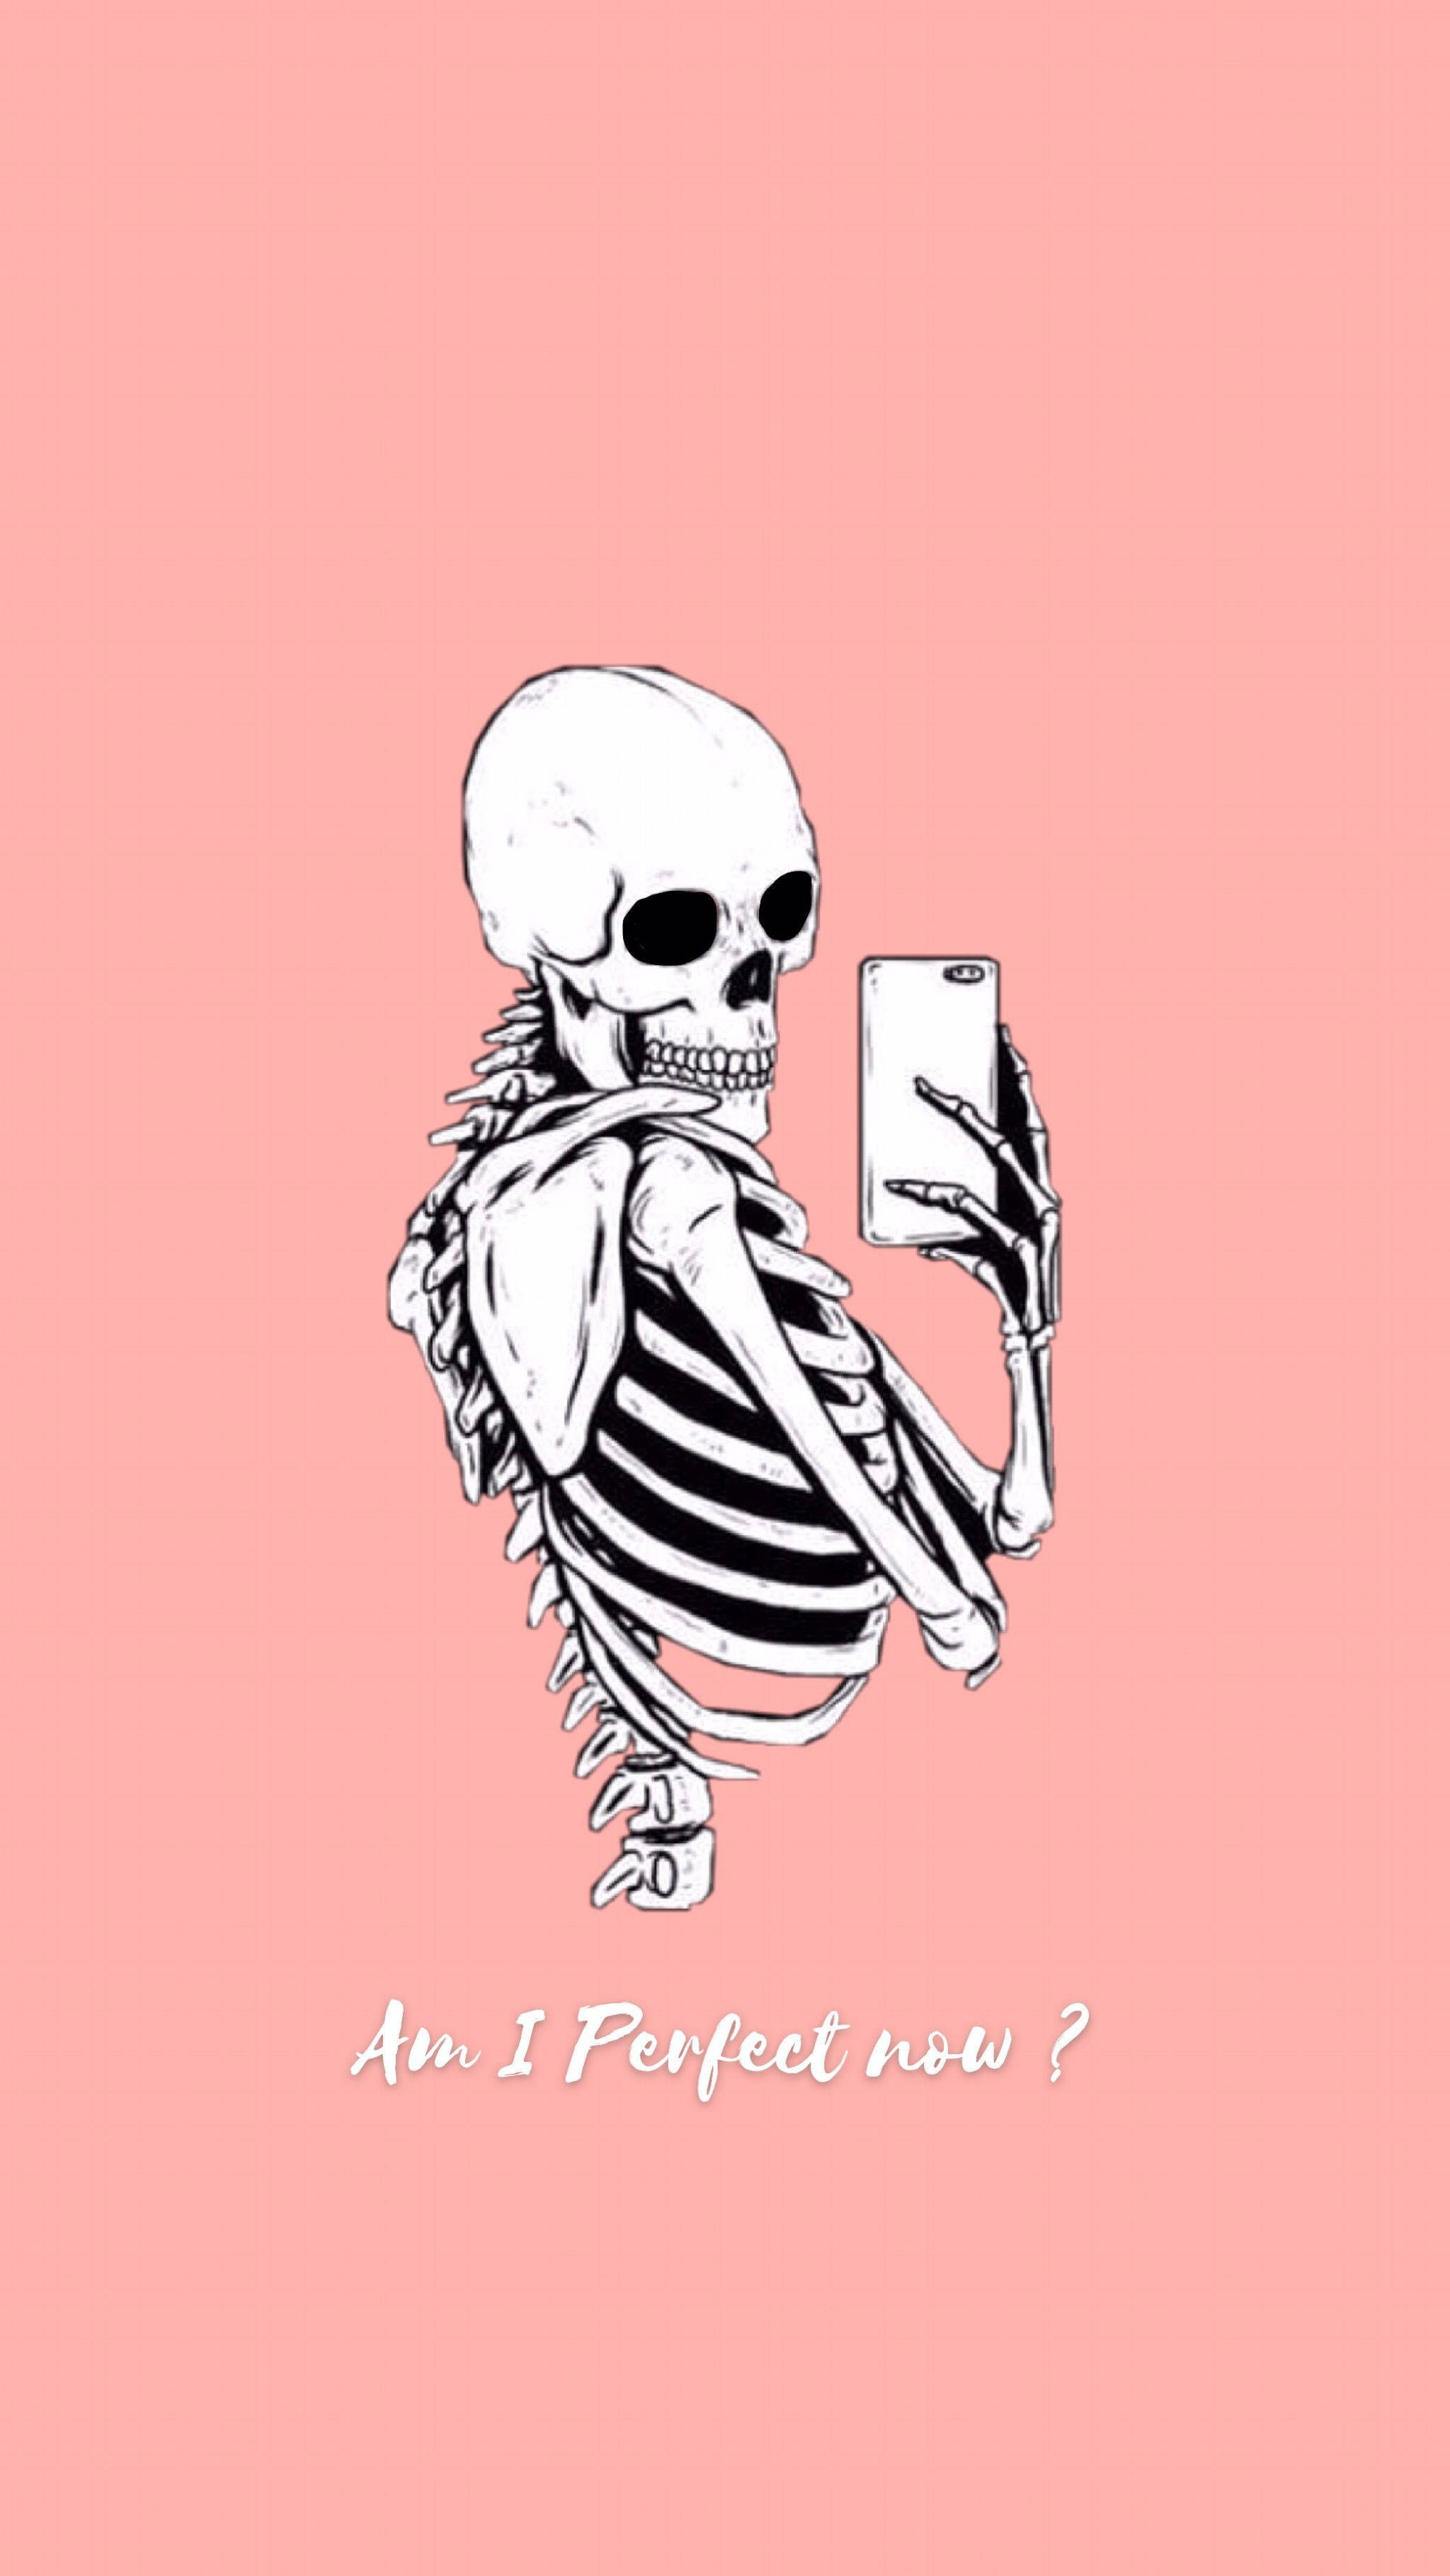 A skeleton taking a selfie with the caption 